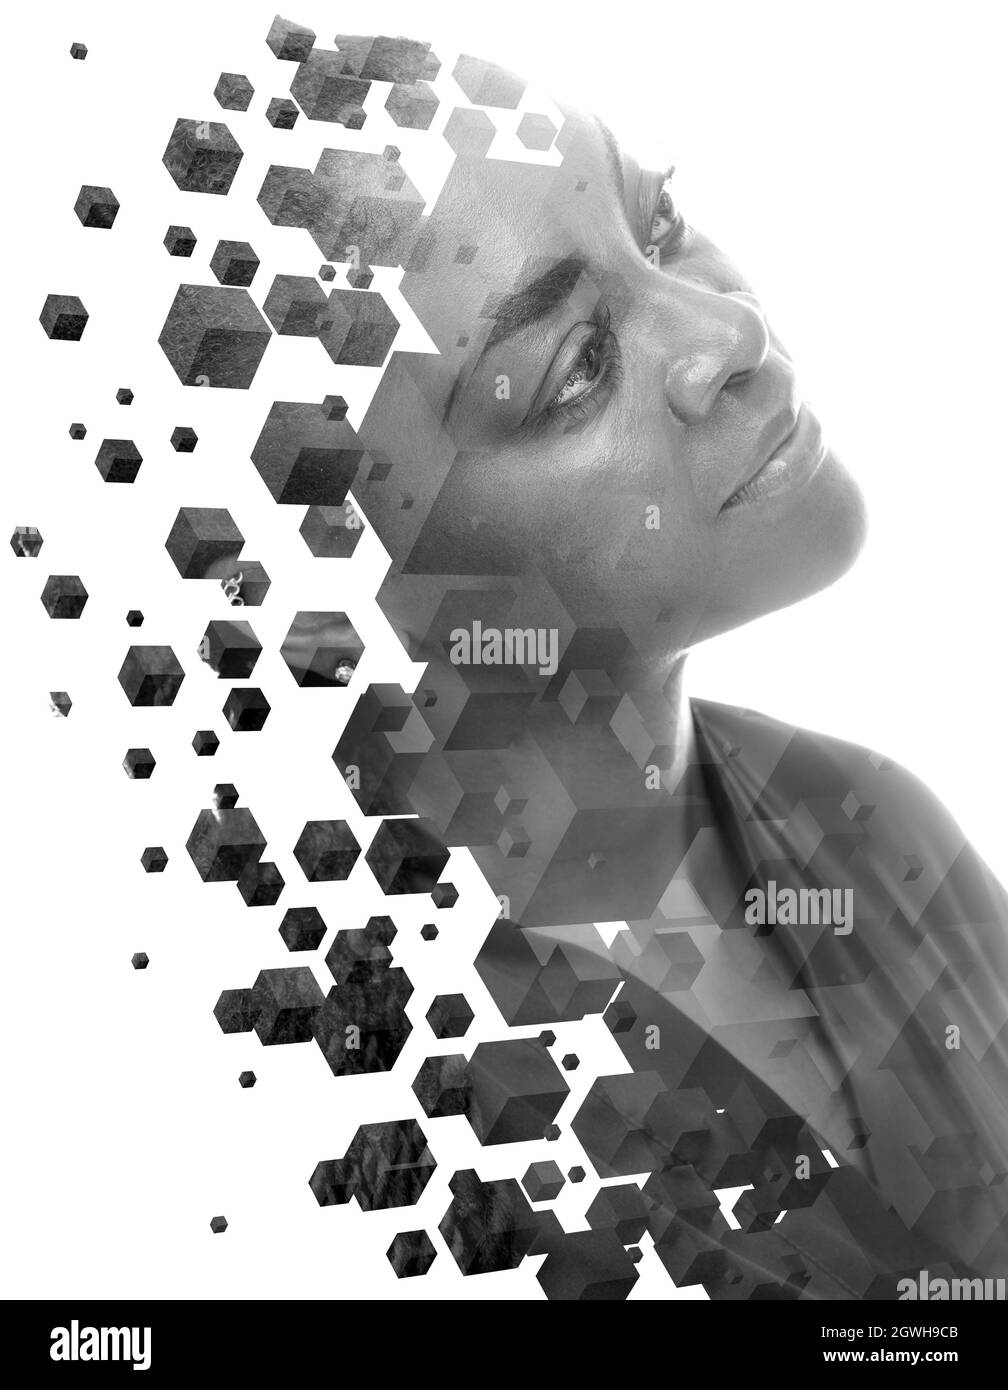 A black and white portrait of a young woman combined with multiple 3D cubes. Stock Photo